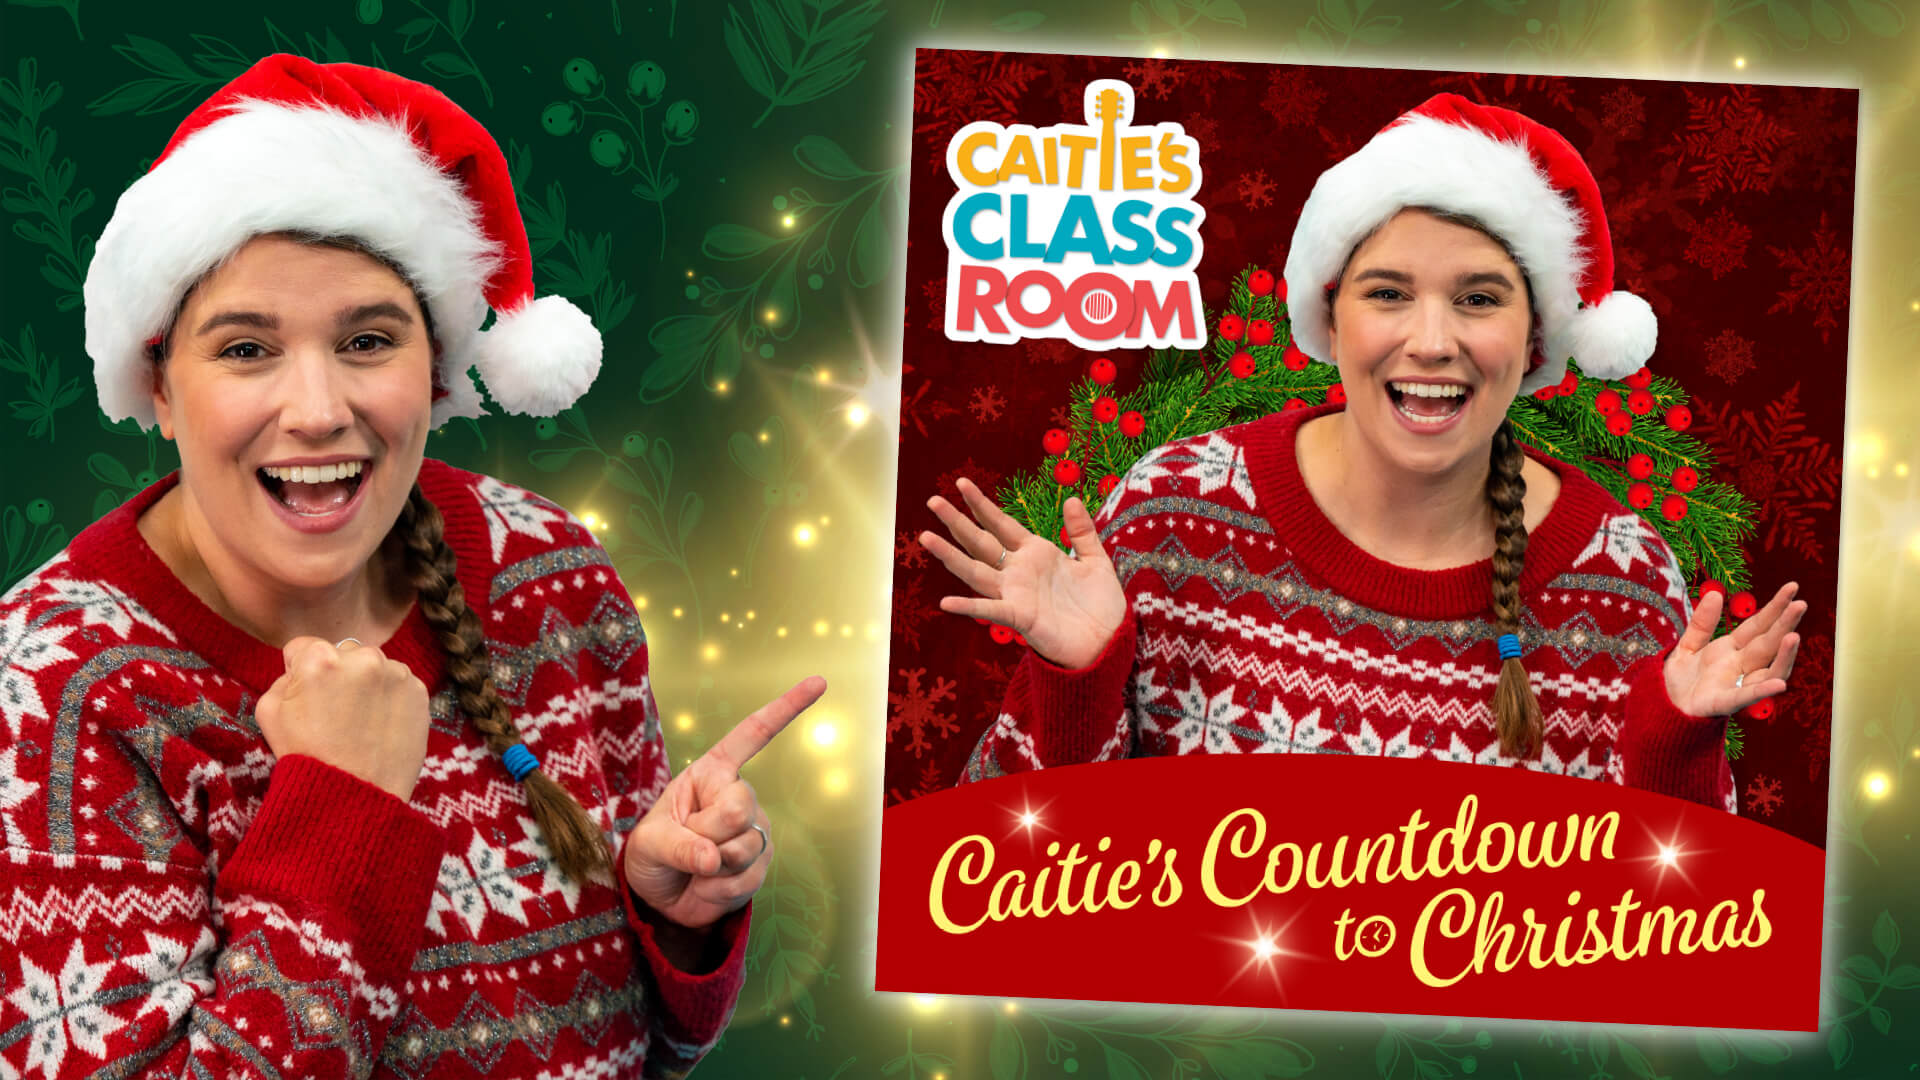 Caitie’s Classroom and Warner Music Group’s Arts Music Release Fresh New Christmas Music! 